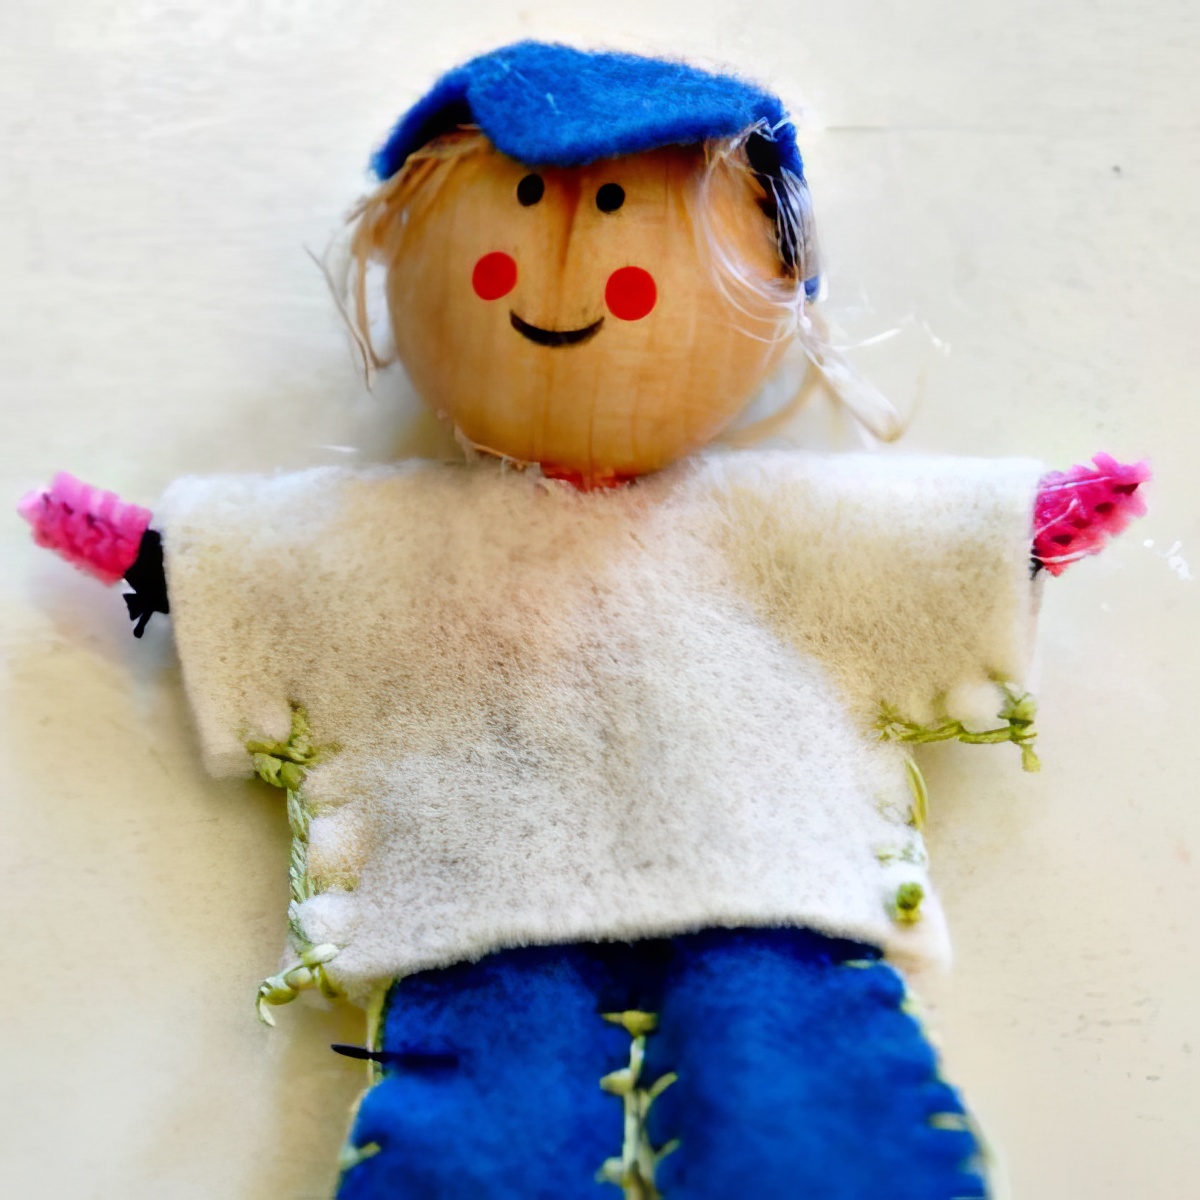 Felt Dollhouse Dolls with pipe cleaners for hands and feet